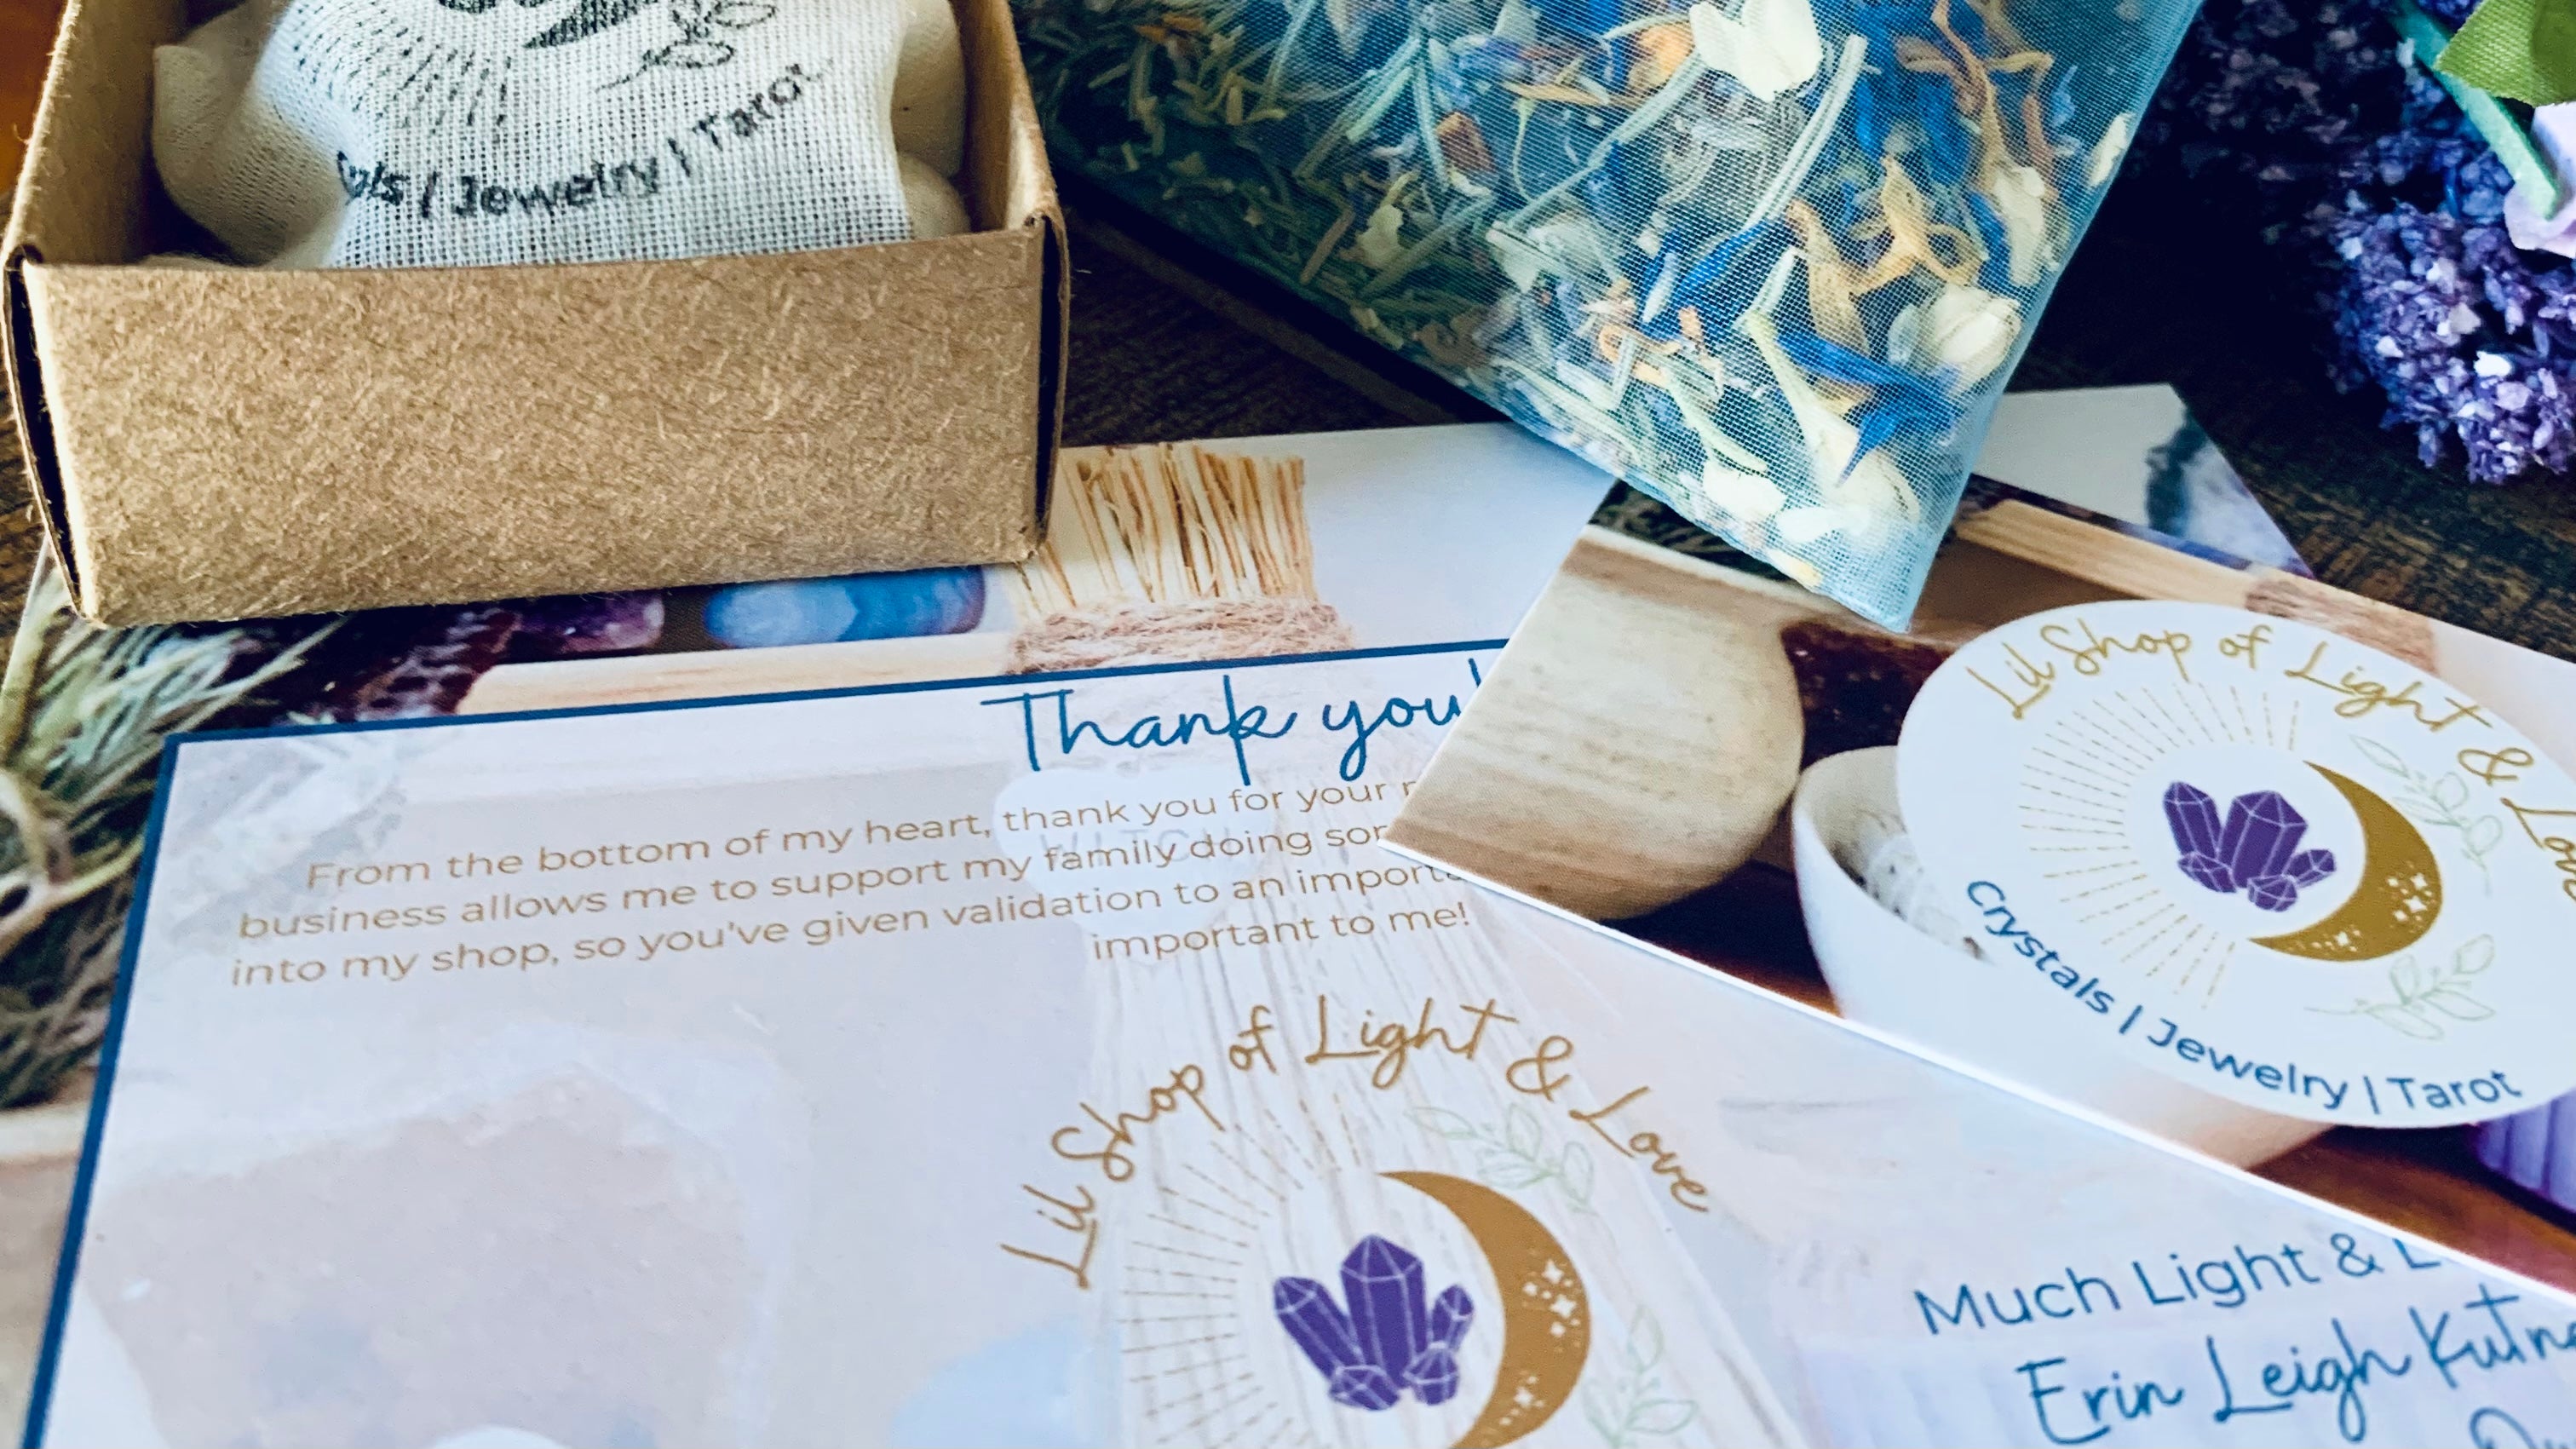 Lil shop of light & love packaging, including business card, thank you card, herb & crystal mix in a small sachet, a small craft jewelry box with a cloth bag inside, stamped with the lil shop of light & love logo of a crescent moon, crystals, & vines